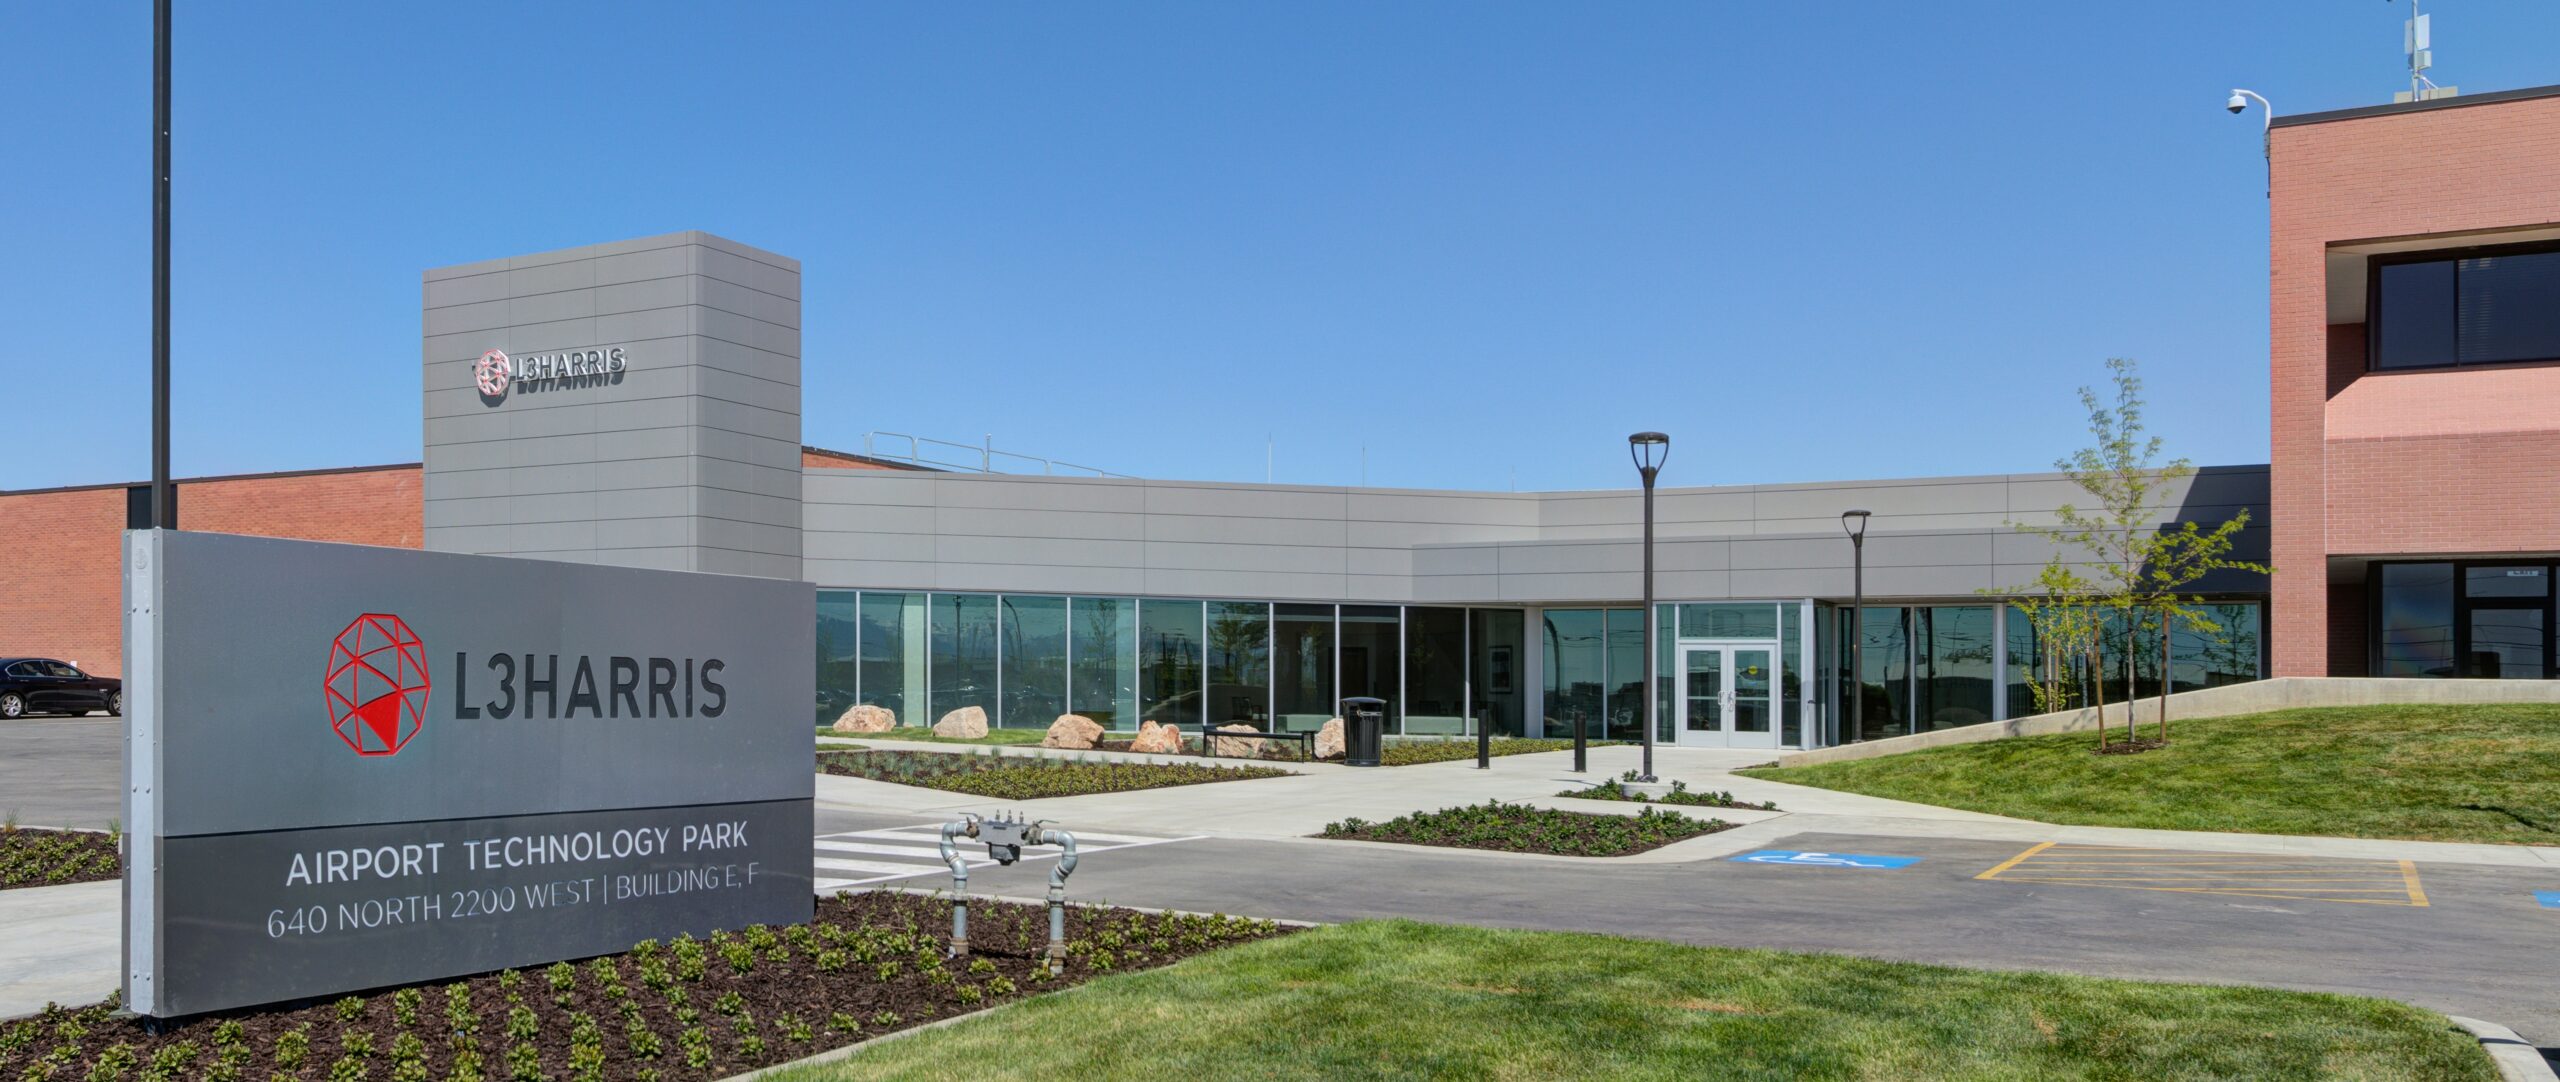 Drawbridge Realty’s Airport Technology Park in Salt Lake City leases extended by L3Harris